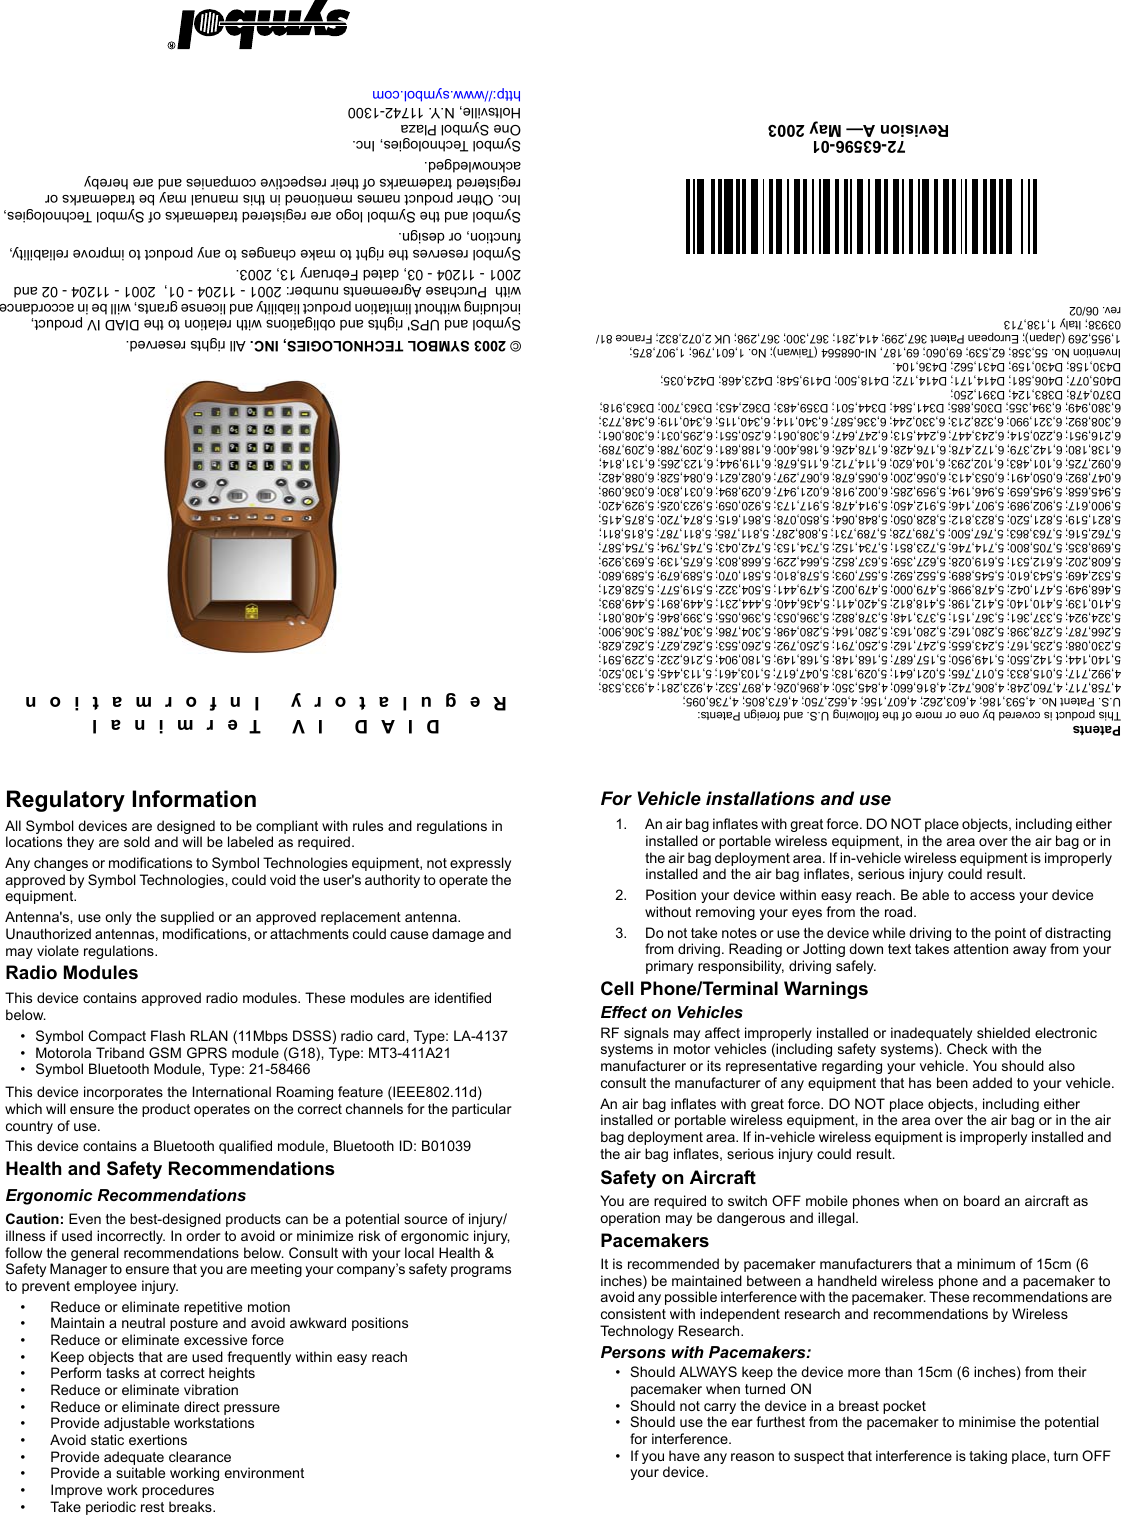 DIAD IV TerminalRegulatory InformationPatentsThis product is covered by one or more of the following U.S. and foreign Patents: U.S. Patent No. 4,593,186; 4,603,262; 4,607,156; 4,652,750; 4,673,805; 4,736,095;4,758,717; 4,760,248; 4,806,742; 4,816,660; 4,845,350; 4,896,026; 4,897,532; 4,923,281; 4,933,538; 4,992,717; 5,015,833; 5,017,765; 5,021,641; 5,029,183; 5,047,617; 5,103,461; 5,113,445; 5,130,520; 5,140,144; 5,142,550; 5,149,950; 5,157,687; 5,168,148; 5,168,149; 5,180,904; 5,216,232; 5,229,591; 5,230,088; 5,235,167; 5,243,655; 5,247,162; 5,250,791; 5,250,792; 5,260,553; 5,262,627; 5,262,628; 5,266,787; 5,278,398; 5,280,162; 5,280,163; 5,280,164; 5,280,498; 5,304,786; 5,304,788; 5,306,900; 5,324,924; 5,337,361; 5,367,151; 5,373,148; 5,378,882; 5,396,053; 5,396,055; 5,399,846; 5,408,081; 5,410,139; 5,410,140; 5,412,198; 5,418,812; 5,420,411; 5,436,440; 5,444,231; 5,449,891; 5,449,893; 5,468,949; 5,471,042; 5,478,998; 5,479,000; 5,479,002; 5,479,441; 5,504,322; 5,519,577; 5,528,621; 5,532,469; 5,543,610; 5,545,889; 5,552,592; 5,557,093; 5,578,810; 5,581,070; 5,589,679; 5,589,680; 5,608,202; 5,612,531; 5,619,028; 5,627,359; 5,637,852; 5,664,229; 5,668,803; 5,675,139; 5,693,929; 5,698,835; 5,705,800; 5,714,746; 5,723,851; 5,734,152; 5,734,153; 5,742,043; 5,745,794; 5,754,587; 5,762,516; 5,763,863; 5,767,500; 5,789,728; 5,789,731; 5,808,287; 5,811,785; 5,811,787; 5,815,811; 5,821,519; 5,821,520; 5,823,812; 5,828,050; 5,848,064; 5,850,078; 5,861,615; 5,874,720; 5,875,415; 5,900,617; 5,902,989; 5,907,146; 5,912,450; 5,914,478; 5,917,173; 5,920,059; 5,923,025; 5,929,420; 5,945,658; 5,945,659; 5,946,194; 5,959,285; 6,002,918; 6,021,947; 6,029,894; 6,031,830; 6,036,098; 6,047,892; 6,050,491; 6,053,413; 6,056,200; 6,065,678; 6,067,297; 6,082,621; 6,084,528; 6,088,482; 6,092,725; 6,101,483; 6,102,293; 6,104,620; 6,114,712; 6,115,678; 6,119,944; 6,123,265; 6,131,814; 6,138,180; 6,142,379; 6,172,478; 6,176,428; 6,178,426; 6,186,400; 6,188,681; 6,209,788; 6,209,789; 6,216,951; 6,220,514; 6,243,447; 6,244,513; 6,247,647; 6,308,061; 6,250,551; 6,295,031; 6,308,061; 6,308,892; 6,321,990; 6,328,213; 6,330,244; 6,336,587; 6,340,114; 6,340,115; 6,340,119; 6,348,773; 6,380,949; 6,394,355; D305,885; D341,584; D344,501; D359,483; D362,453; D363,700; D363,918; D370,478; D383,124; D391,250;D405,077; D406,581; D414,171; D414,172; D418,500; D419,548; D423,468; D424,035;D430,158; D430,159; D431,562; D436,104.Invention No. 55,358; 62,539; 69,060; 69,187, NI-068564 (Taiwan); No. 1,601,796; 1,907,875; 1,955,269 (Japan); European Patent 367,299; 414,281; 367,300; 367,298; UK 2,072,832; France 81/03938; Italy 1,138,713rev. 06/02© 2003 SYMBOL TECHNOLOGIES, INC. All rights reserved.Symbol and UPS&apos; rights and obligations with relation to the DIAD IV product,  including without limitation product liability and license grants, will be in accordance with  Purchase Agreements number: 2001 - 11204 - 01,  2001 - 11204 - 02 and 2001 - 11204 - 03, dated February 13, 2003.Symbol reserves the right to make changes to any product to improve reliability, function, or design. Symbol and the Symbol logo are registered trademarks of Symbol Technologies, Inc. Other product names mentioned in this manual may be trademarks or registered trademarks of their respective companies and are hereby acknowledged.Symbol Technologies, Inc.One Symbol PlazaHoltsville, N.Y. 11742-1300http://www.symbol.com72-63596-01Revision A— May 2003For Vehicle installations and use1. An air bag inflates with great force. DO NOT place objects, including either installed or portable wireless equipment, in the area over the air bag or in the air bag deployment area. If in-vehicle wireless equipment is improperly installed and the air bag inflates, serious injury could result. 2. Position your device within easy reach. Be able to access your device without removing your eyes from the road.3. Do not take notes or use the device while driving to the point of distracting from driving. Reading or Jotting down text takes attention away from your primary responsibility, driving safely.Cell Phone/Terminal WarningsEffect on VehiclesRF signals may affect improperly installed or inadequately shielded electronic systems in motor vehicles (including safety systems). Check with the manufacturer or its representative regarding your vehicle. You should also consult the manufacturer of any equipment that has been added to your vehicle.An air bag inflates with great force. DO NOT place objects, including either installed or portable wireless equipment, in the area over the air bag or in the air bag deployment area. If in-vehicle wireless equipment is improperly installed and the air bag inflates, serious injury could result. Safety on AircraftYou are required to switch OFF mobile phones when on board an aircraft as operation may be dangerous and illegal.PacemakersIt is recommended by pacemaker manufacturers that a minimum of 15cm (6 inches) be maintained between a handheld wireless phone and a pacemaker to avoid any possible interference with the pacemaker. These recommendations are consistent with independent research and recommendations by Wireless Technology Research.Persons with Pacemakers:• Should ALWAYS keep the device more than 15cm (6 inches) from their pacemaker when turned ON• Should not carry the device in a breast pocket• Should use the ear furthest from the pacemaker to minimise the potential for interference.• If you have any reason to suspect that interference is taking place, turn OFF your device.Regulatory InformationAll Symbol devices are designed to be compliant with rules and regulations in locations they are sold and will be labeled as required.Any changes or modifications to Symbol Technologies equipment, not expressly approved by Symbol Technologies, could void the user&apos;s authority to operate the equipment.Antenna&apos;s, use only the supplied or an approved replacement antenna. Unauthorized antennas, modifications, or attachments could cause damage and may violate regulations. Radio ModulesThis device contains approved radio modules. These modules are identified below. • Symbol Compact Flash RLAN (11Mbps DSSS) radio card, Type: LA-4137• Motorola Triband GSM GPRS module (G18), Type: MT3-411A21• Symbol Bluetooth Module, Type: 21-58466This device incorporates the International Roaming feature (IEEE802.11d) which will ensure the product operates on the correct channels for the particular country of use.This device contains a Bluetooth qualified module, Bluetooth ID: B01039Health and Safety Recommendations Ergonomic RecommendationsCaution: Even the best-designed products can be a potential source of injury/illness if used incorrectly. In order to avoid or minimize risk of ergonomic injury, follow the general recommendations below. Consult with your local Health &amp; Safety Manager to ensure that you are meeting your company’s safety programs to prevent employee injury.• Reduce or eliminate repetitive motion• Maintain a neutral posture and avoid awkward positions• Reduce or eliminate excessive force• Keep objects that are used frequently within easy reach• Perform tasks at correct heights• Reduce or eliminate vibration• Reduce or eliminate direct pressure• Provide adjustable workstations• Avoid static exertions• Provide adequate clearance• Provide a suitable working environment• Improve work procedures• Take periodic rest breaks.